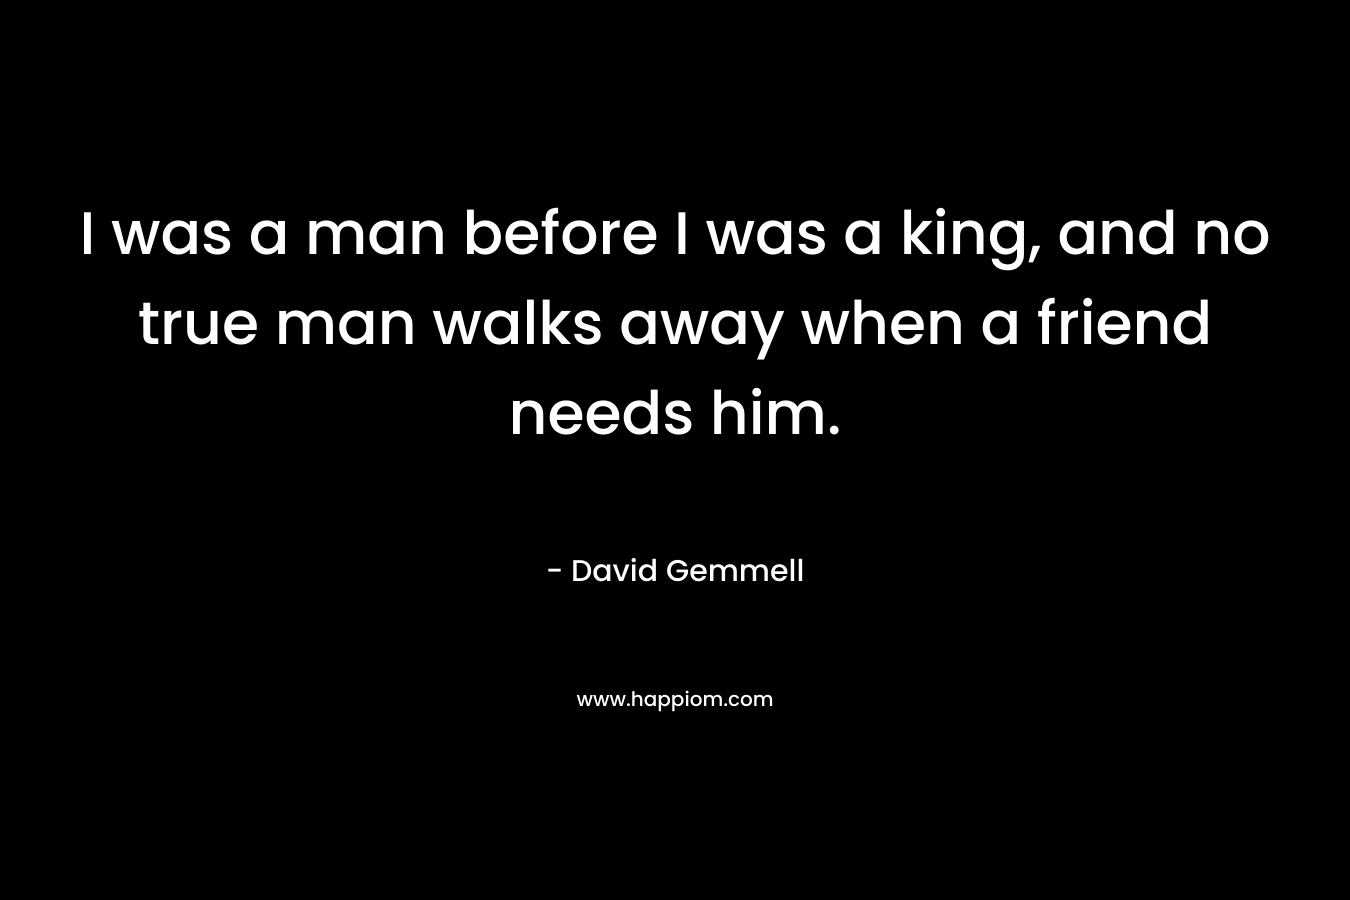 I was a man before I was a king, and no true man walks away when a friend needs him.